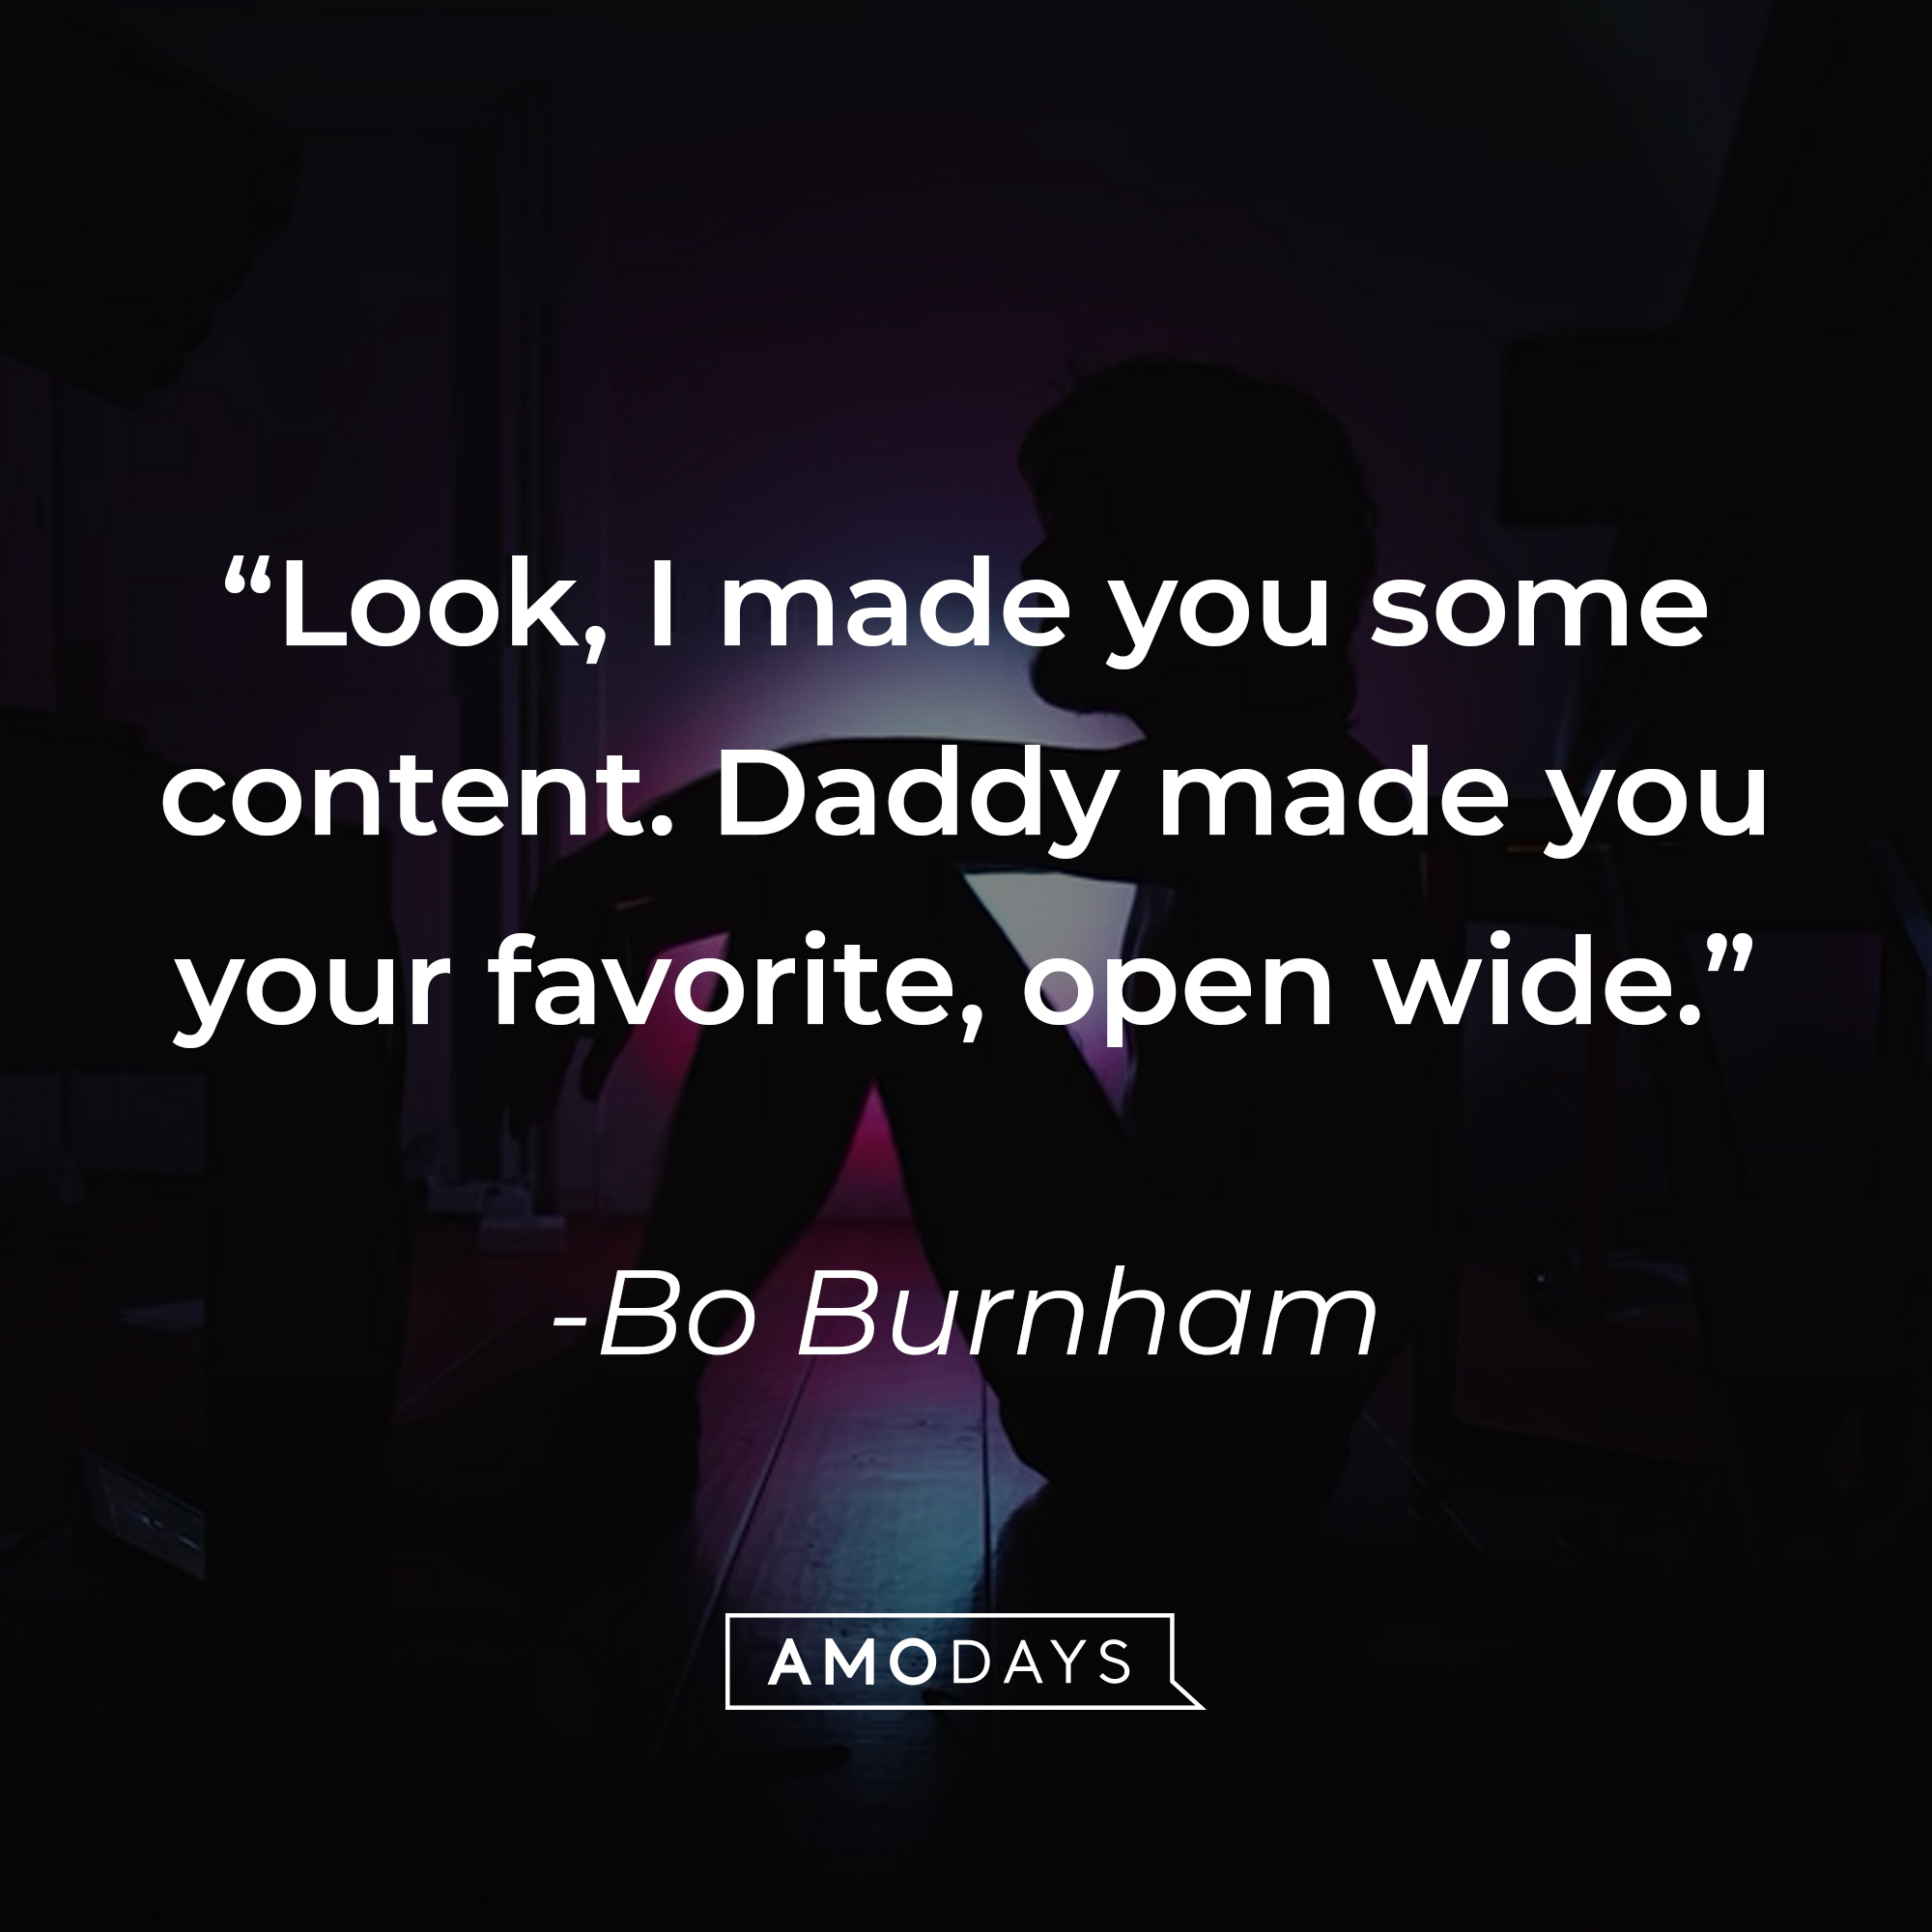 Bo Burnham's quote: "Look, I made you some content. Daddy made you your favorite, open wide." | Source: youtube.com/boburnham